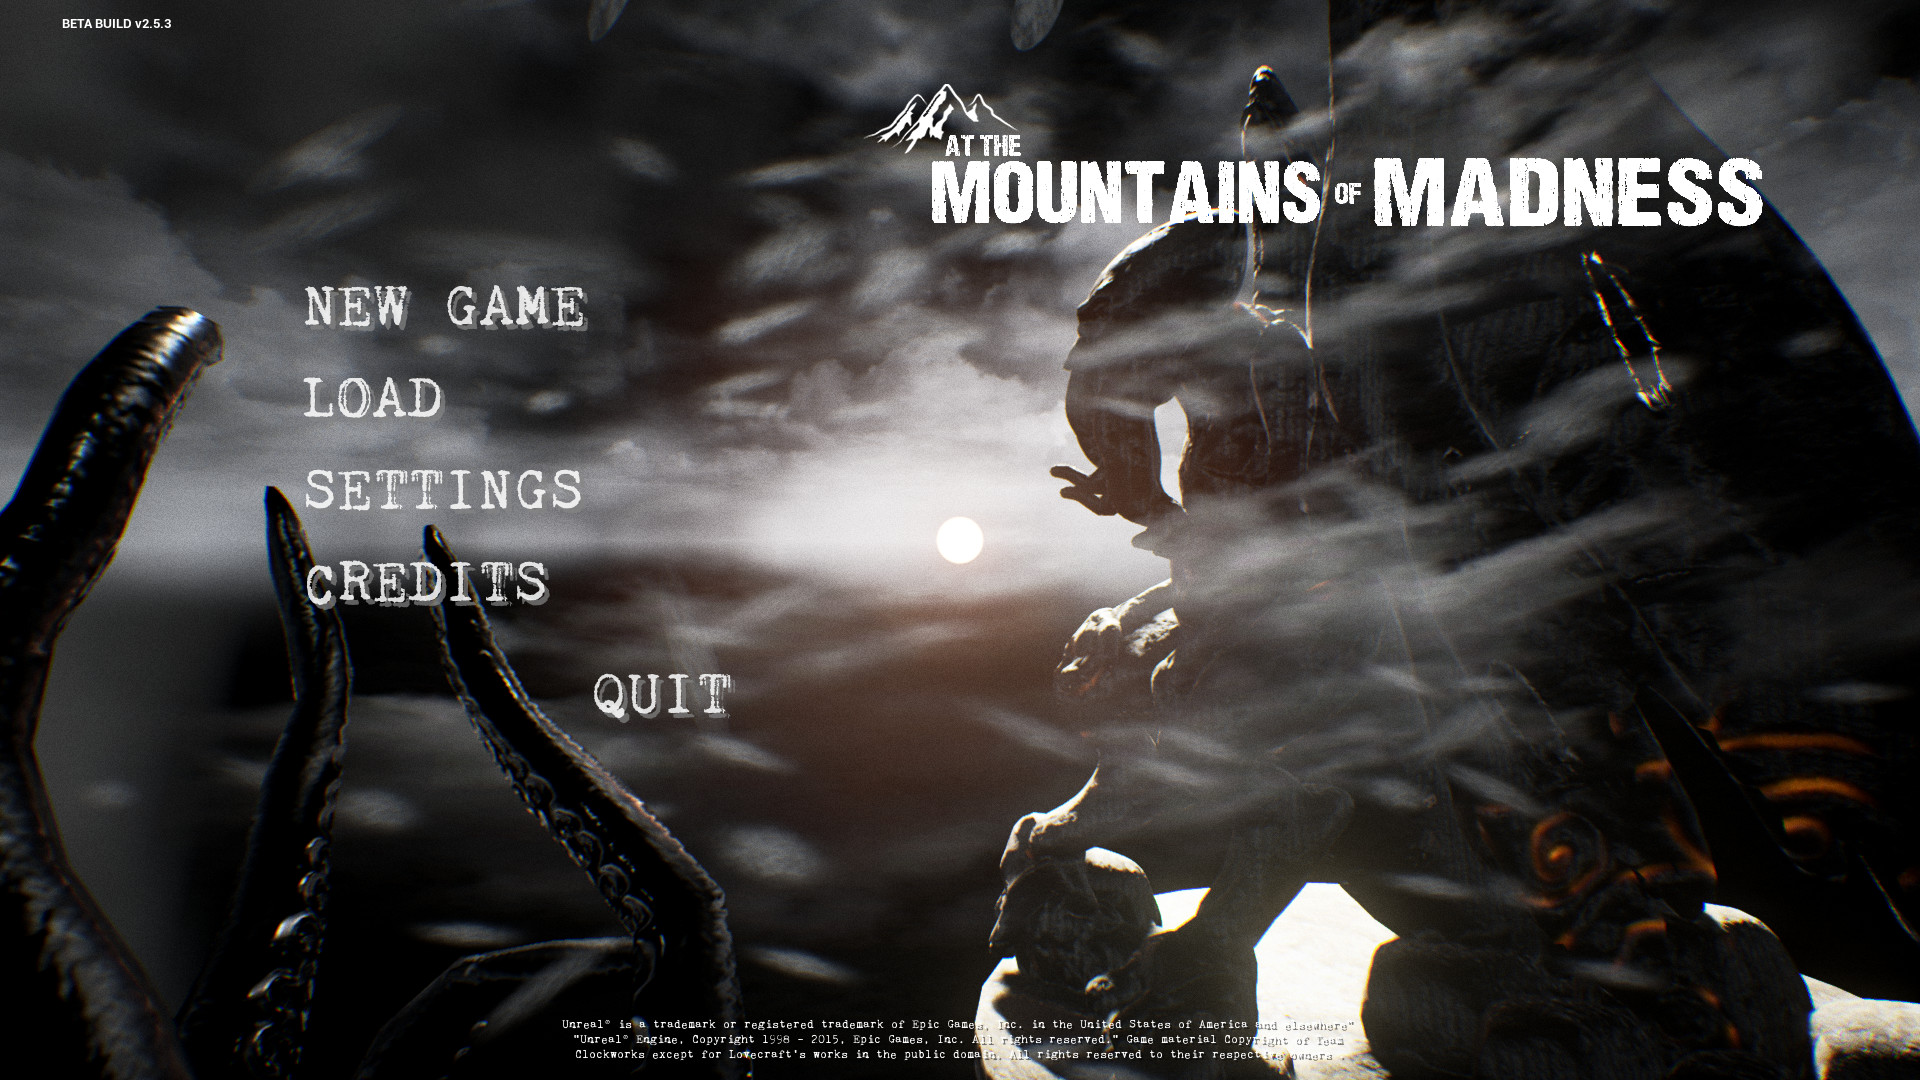 At the Mountains of Madness no Steam